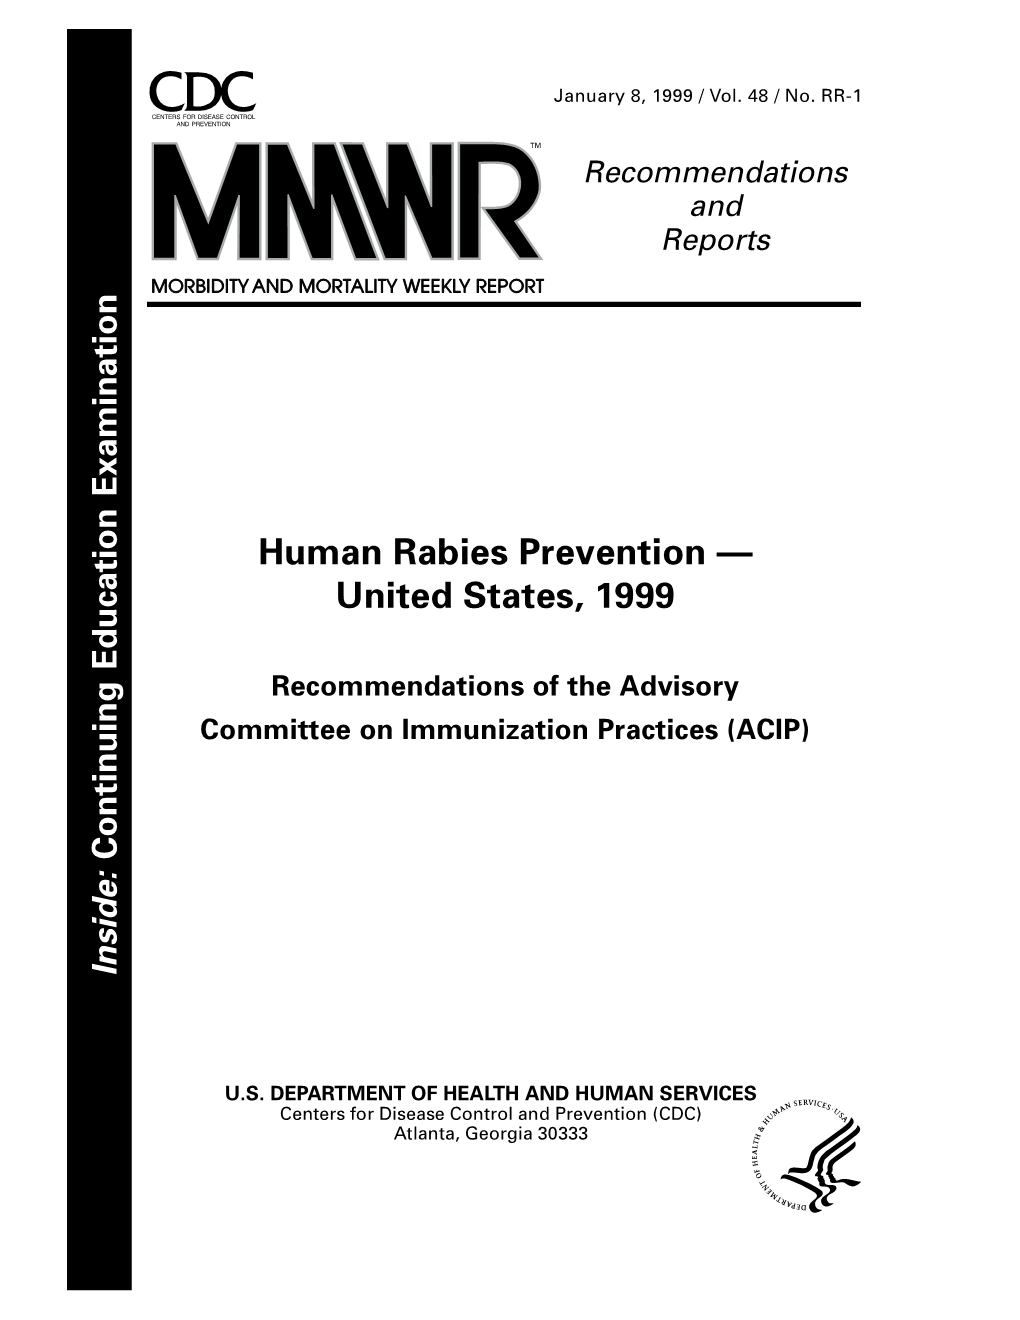 Human Rabies Prevention — United States, 1999